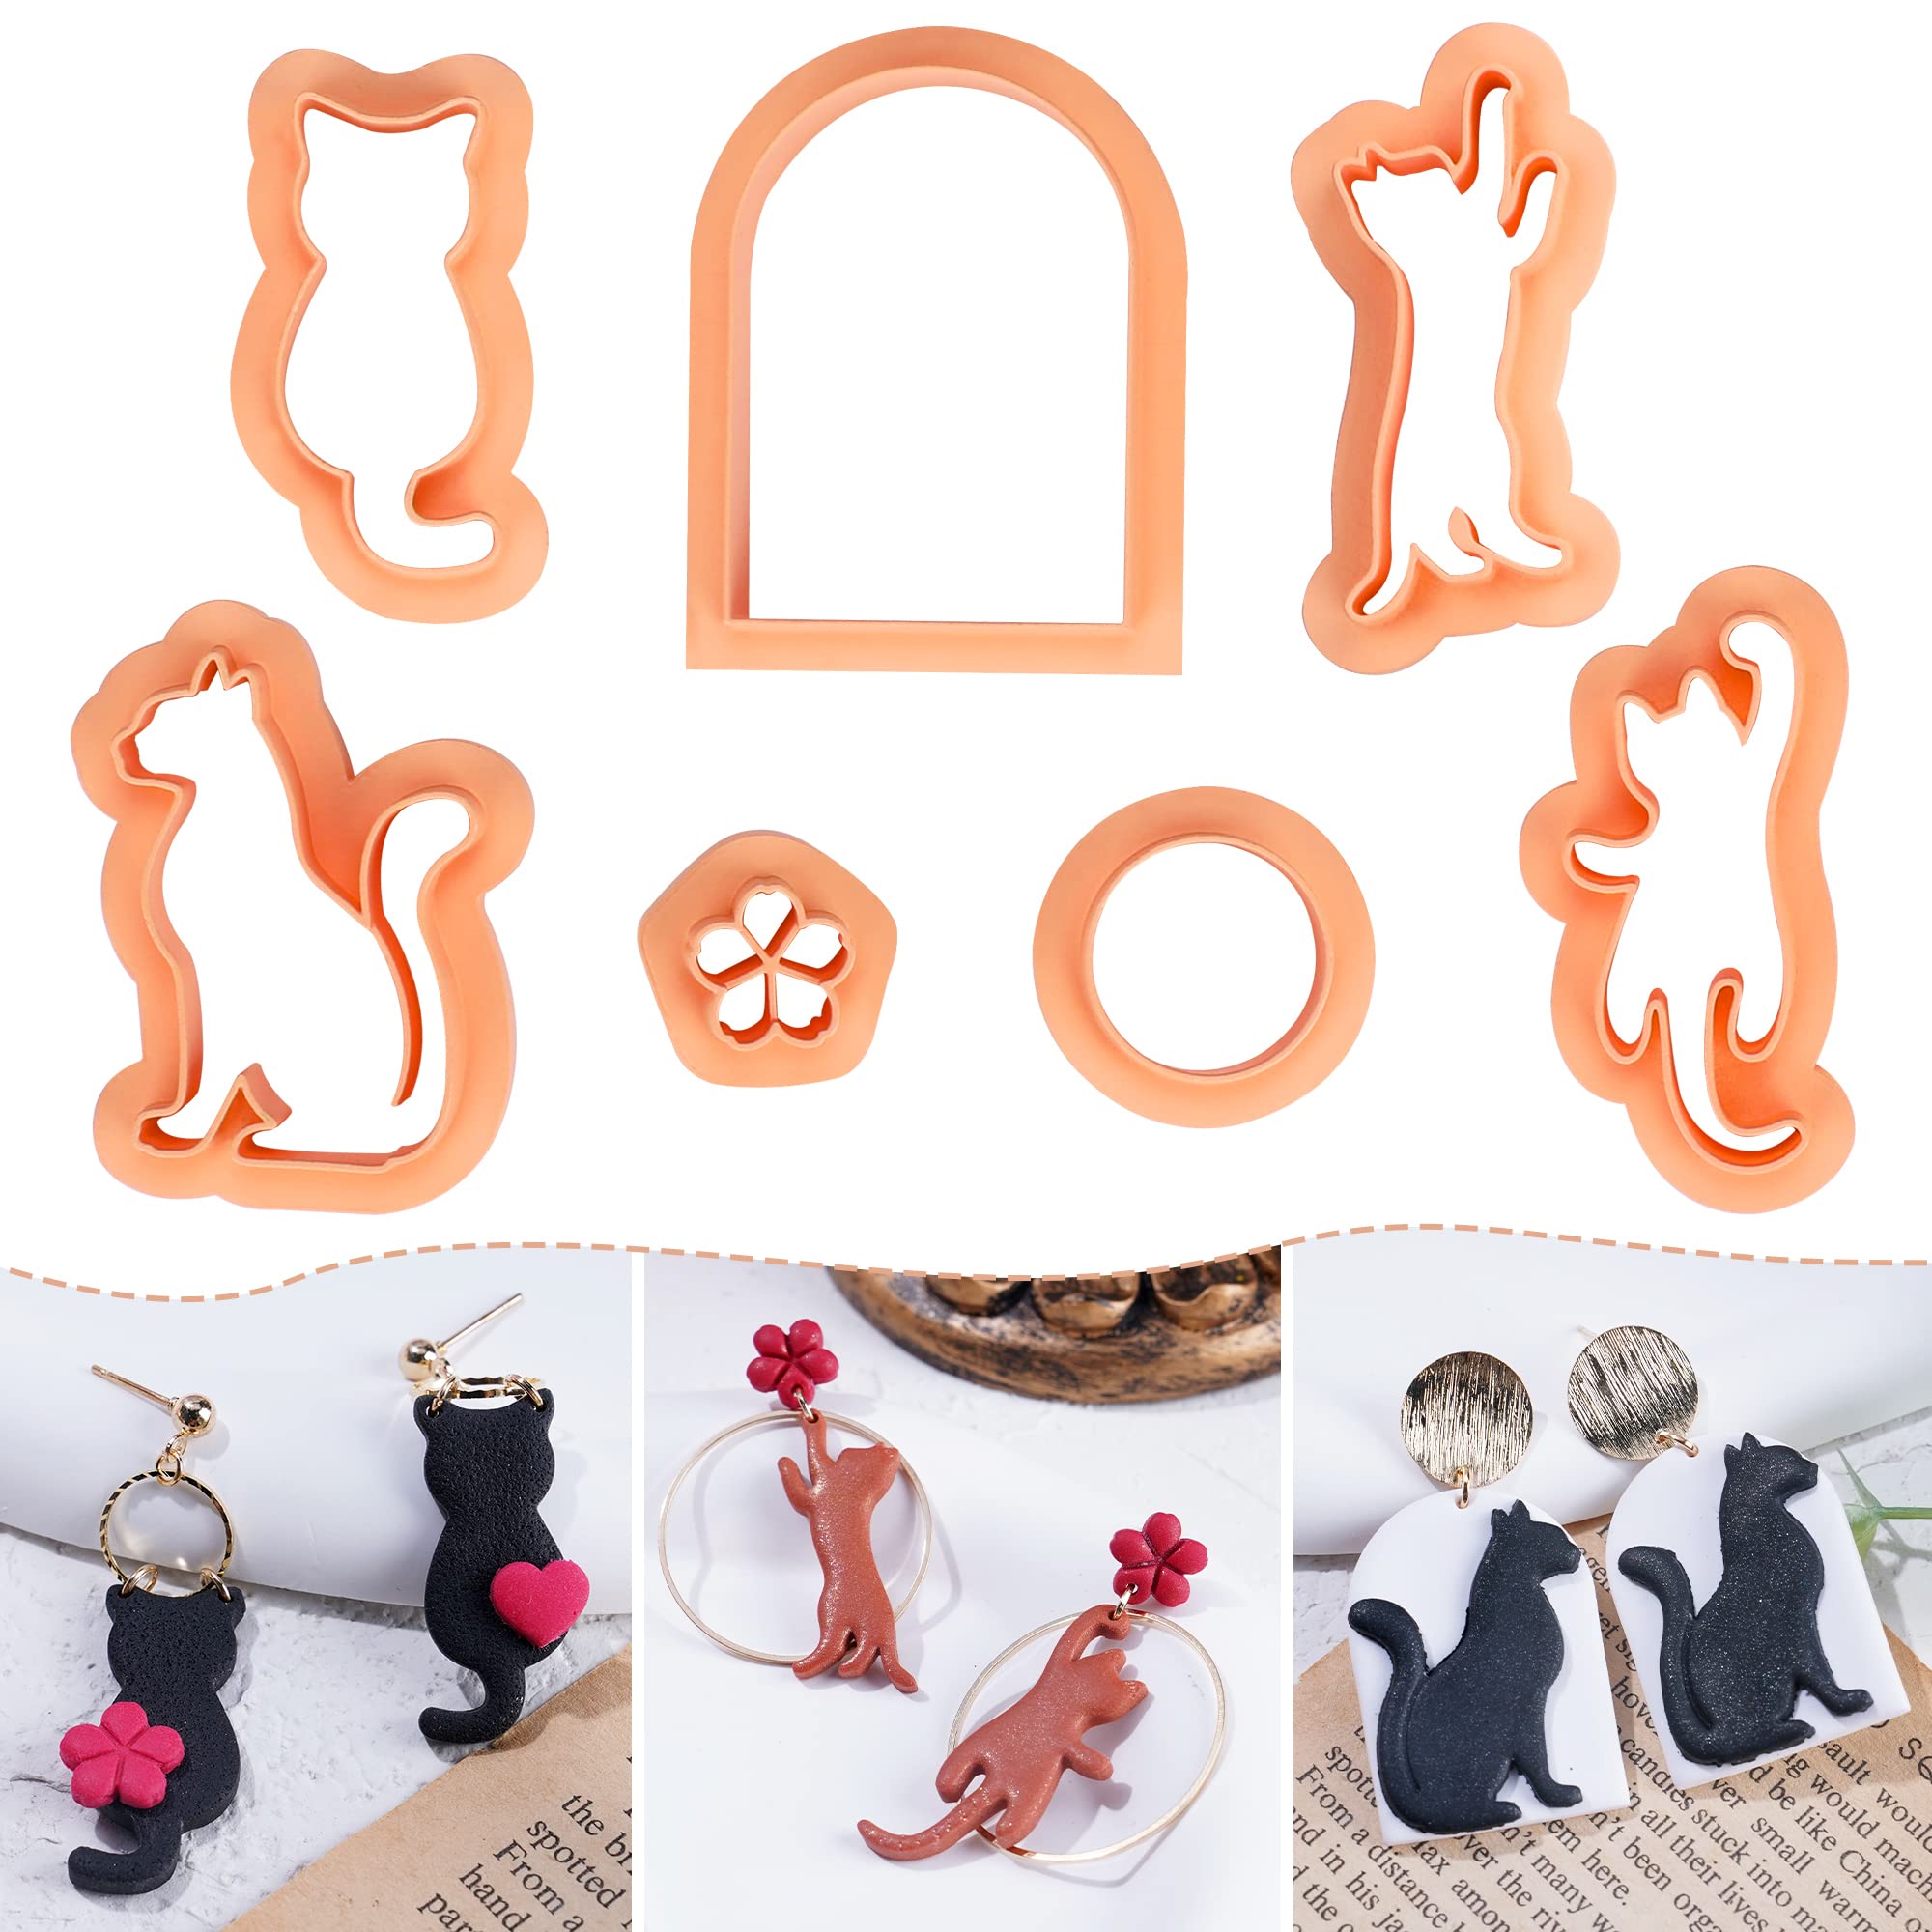 Puocaon Kittens Polymer Clay Cutters 7 Shapes